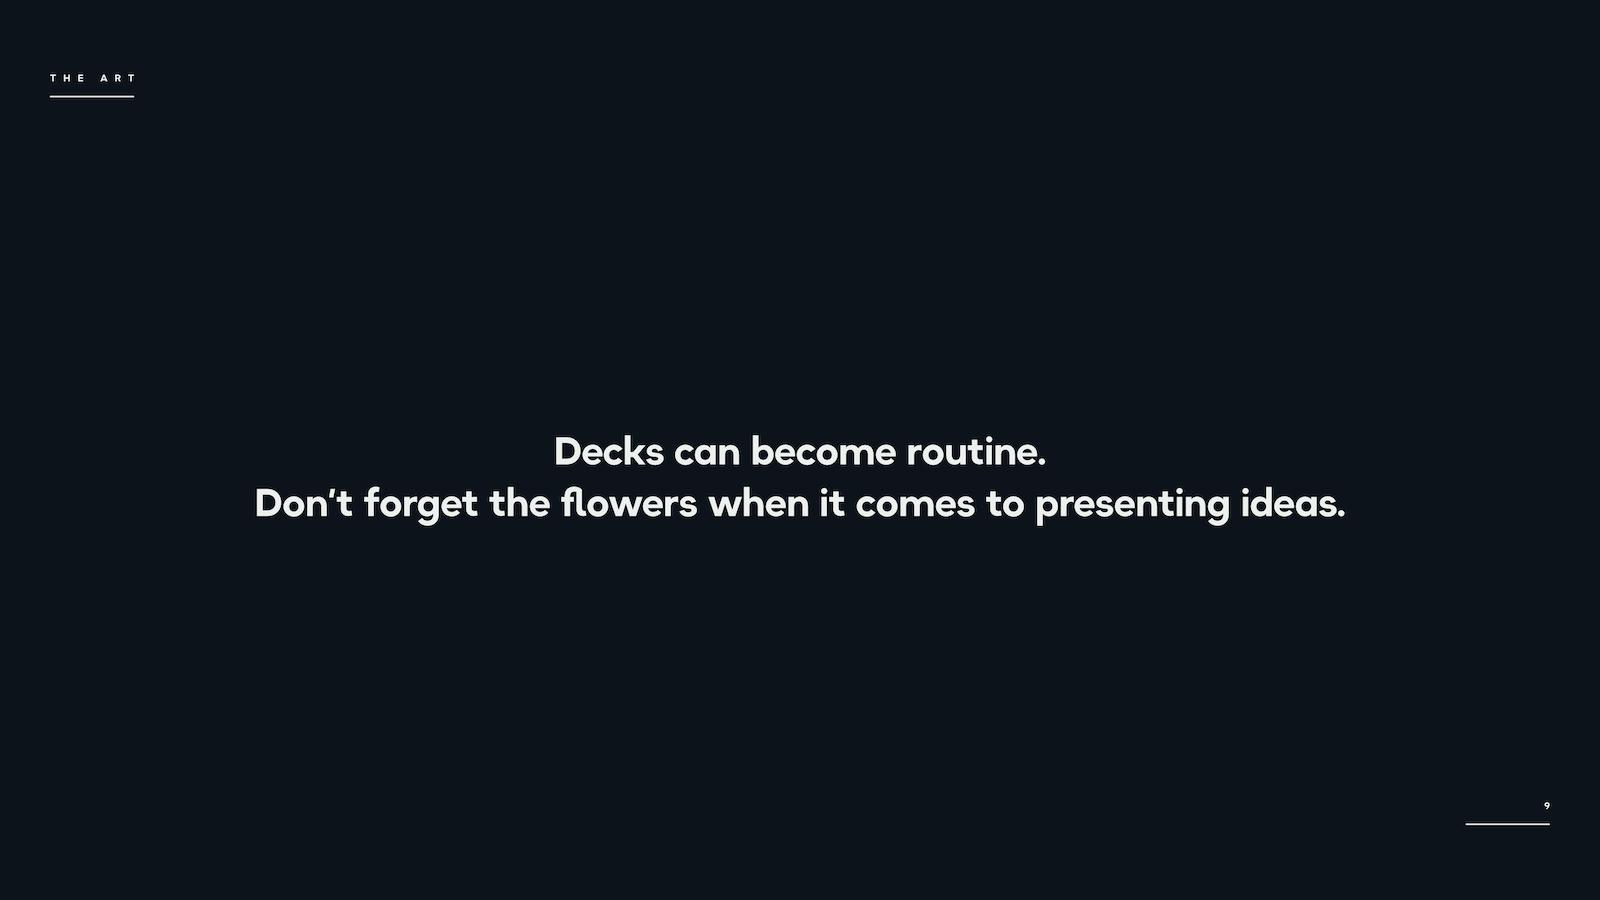 Decks can become routine. Don't forget the flowers when it comes to presenting ideas.